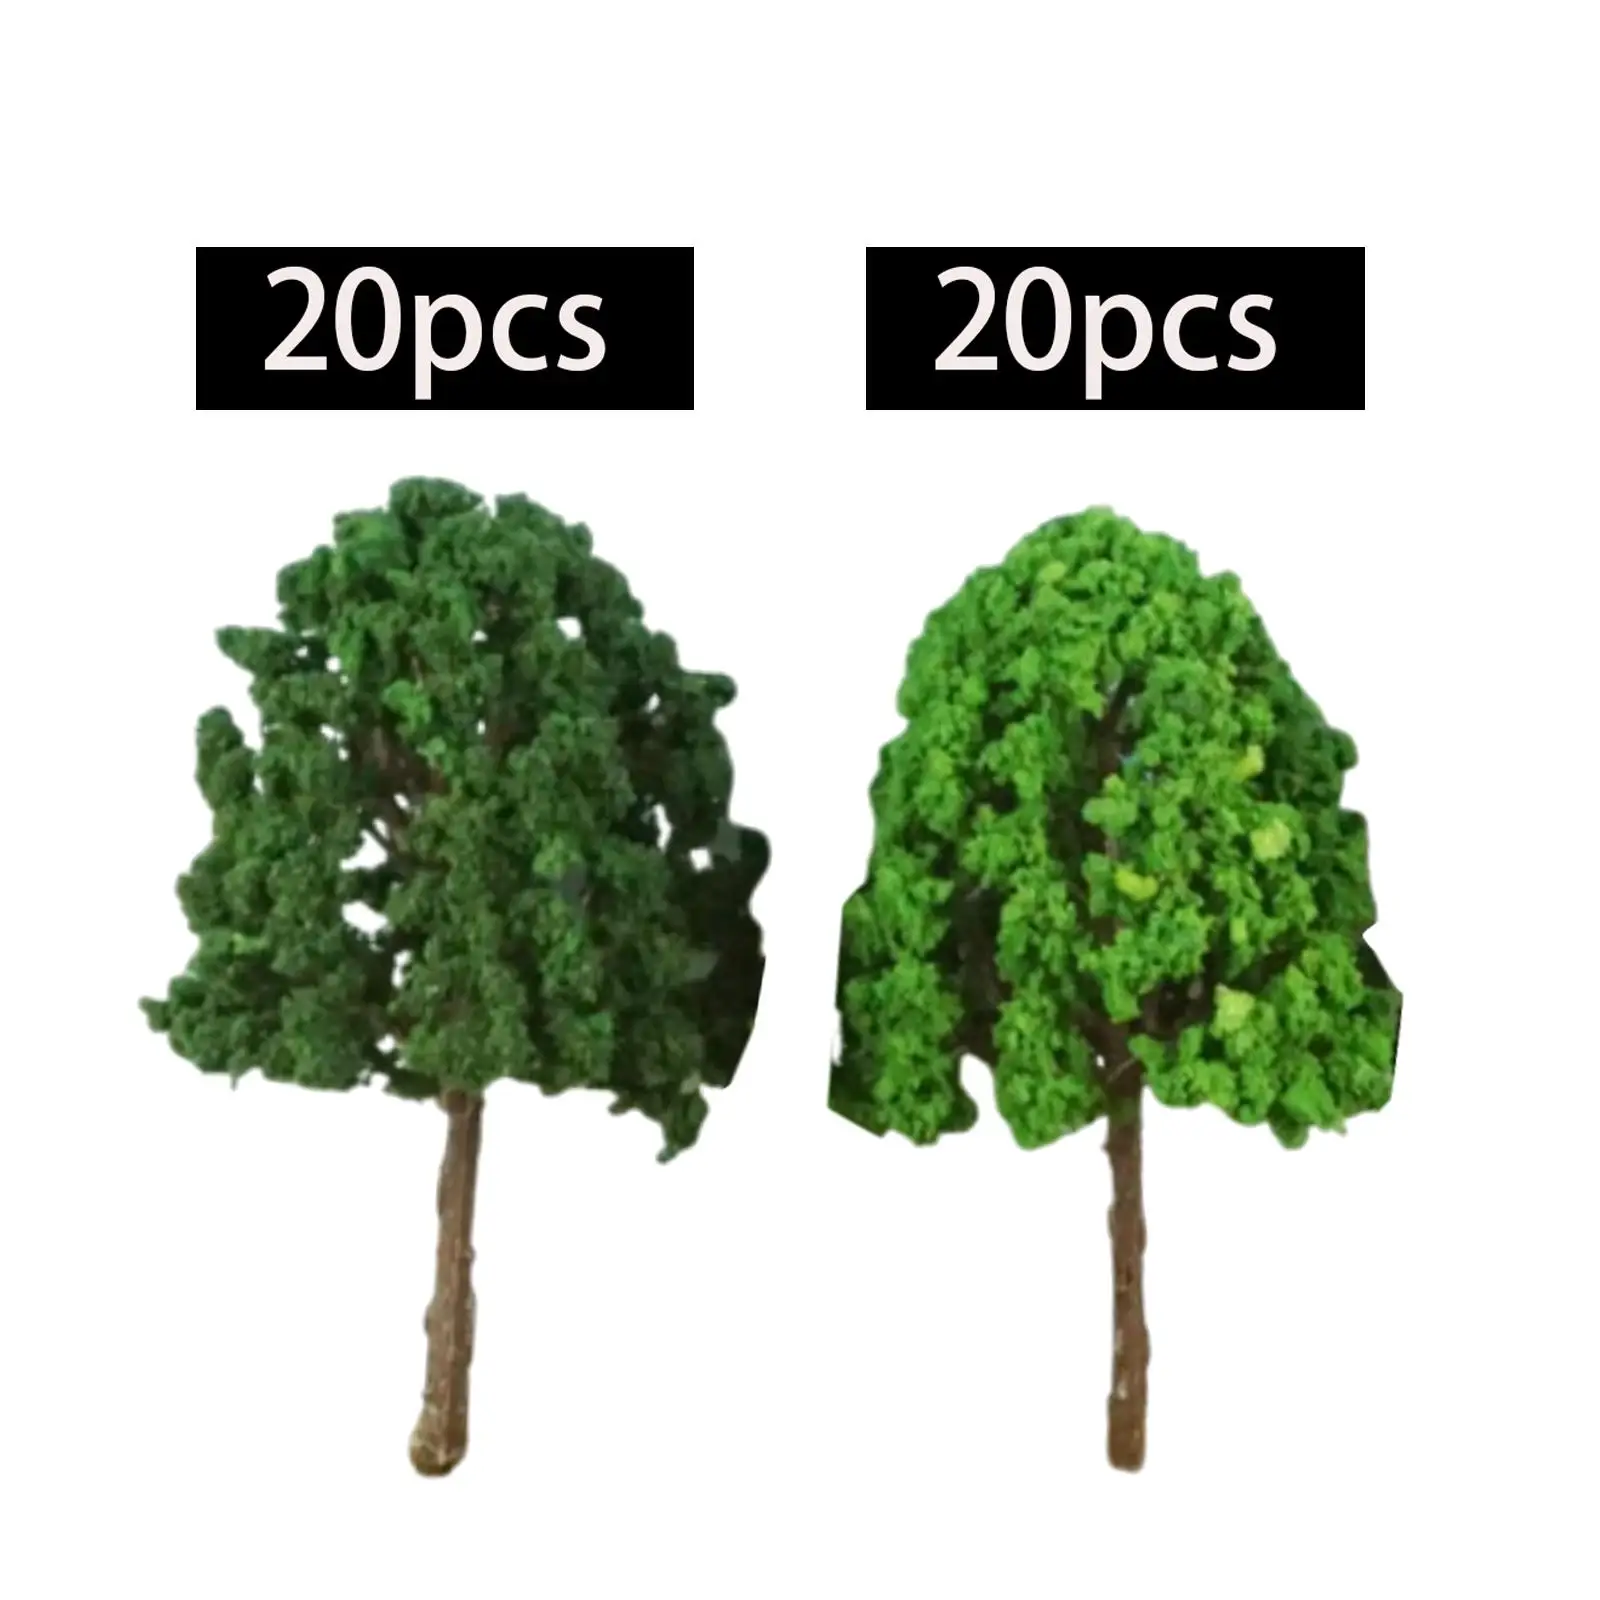 20x Model Trees Layout Diorama Supplies for Railroad Dollhouse DIY Projects